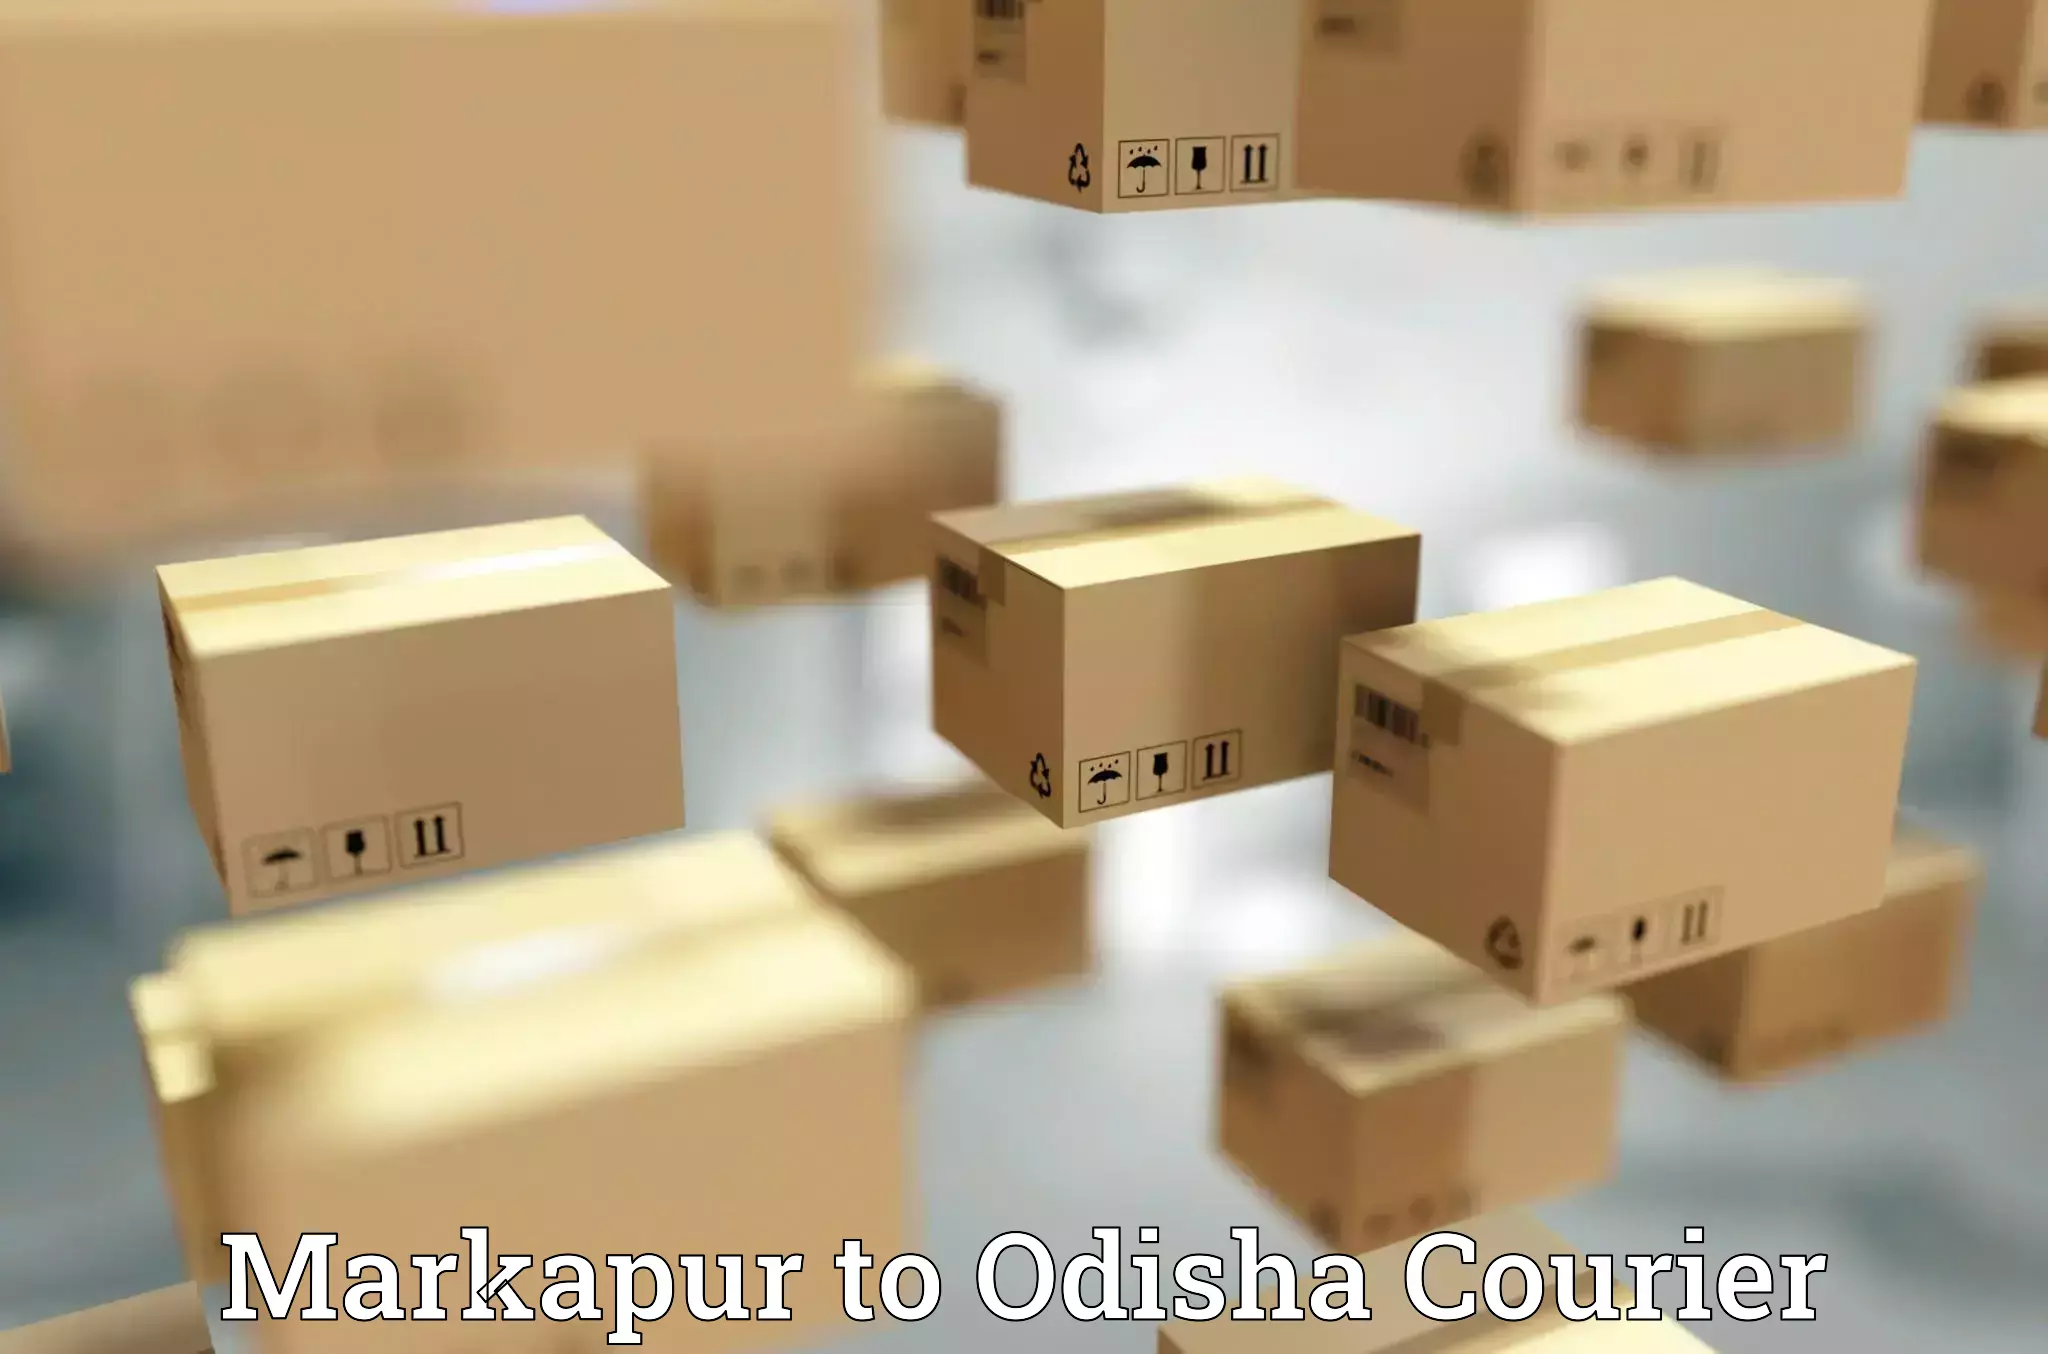 Courier service efficiency in Markapur to Kendrapara